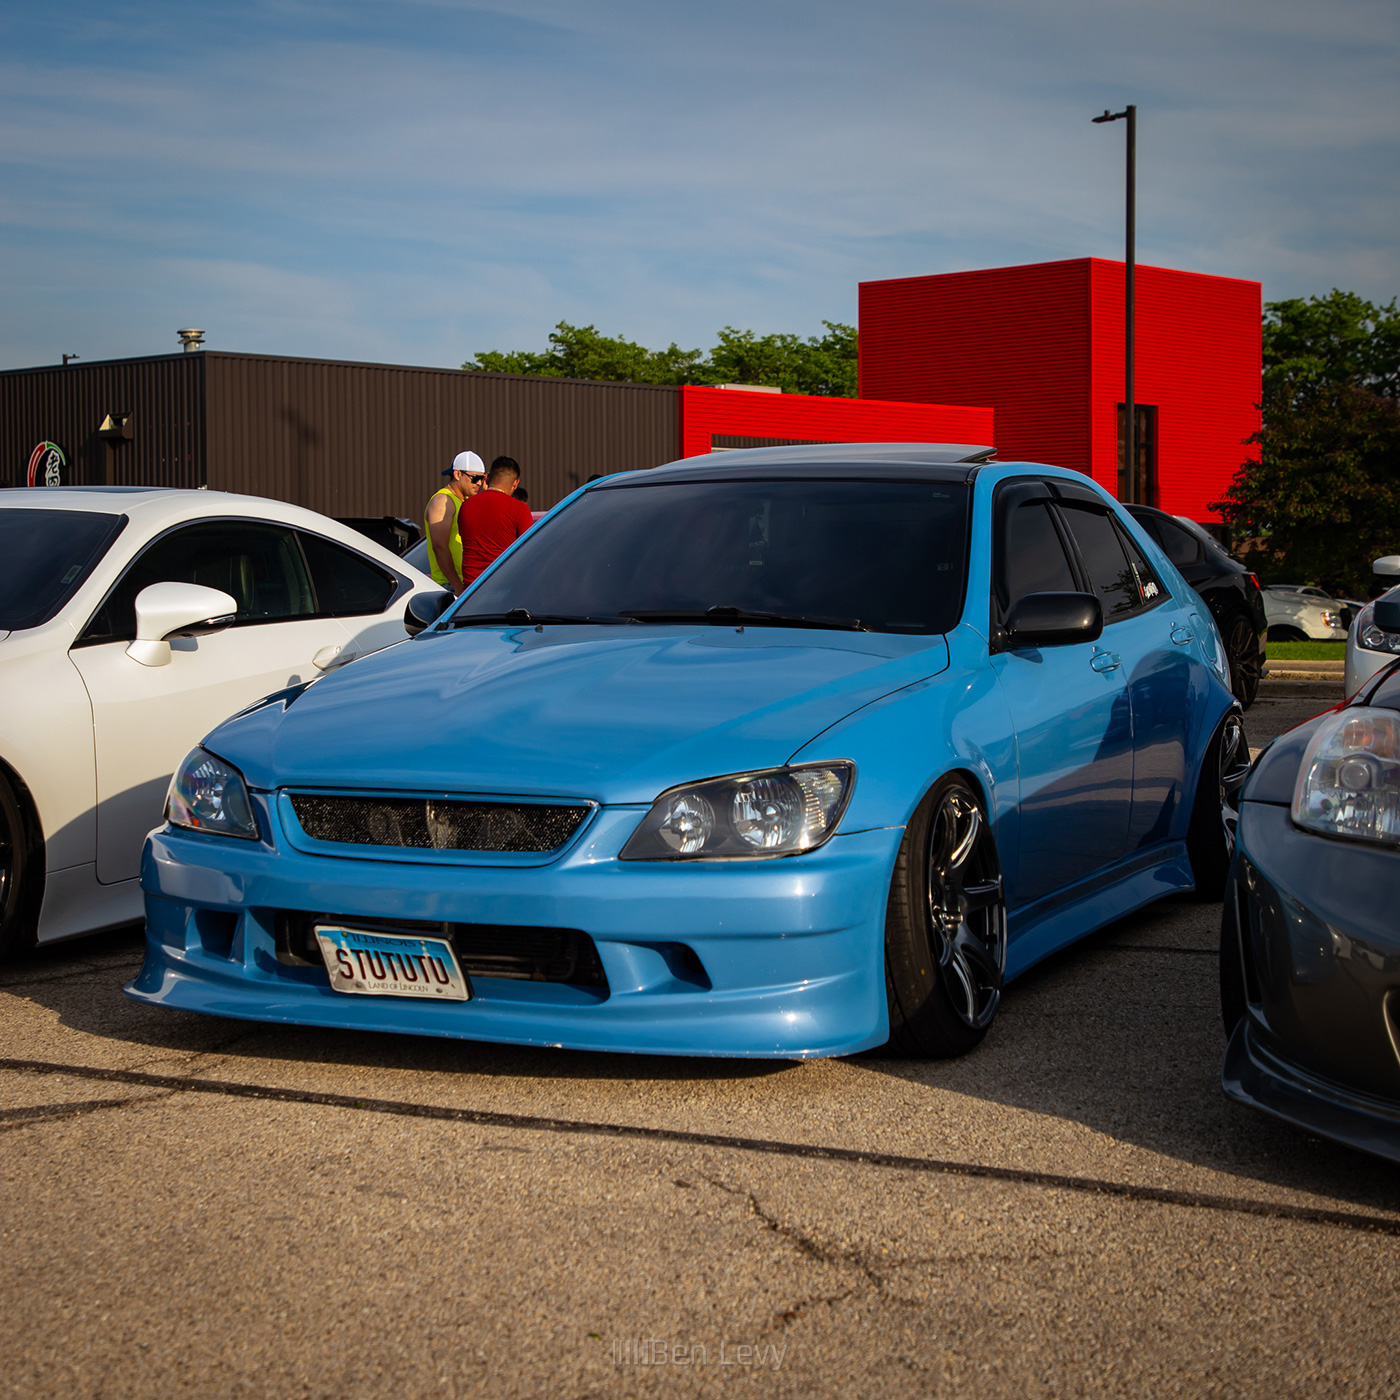 Blue Lexus IS300 with Flared Fenders